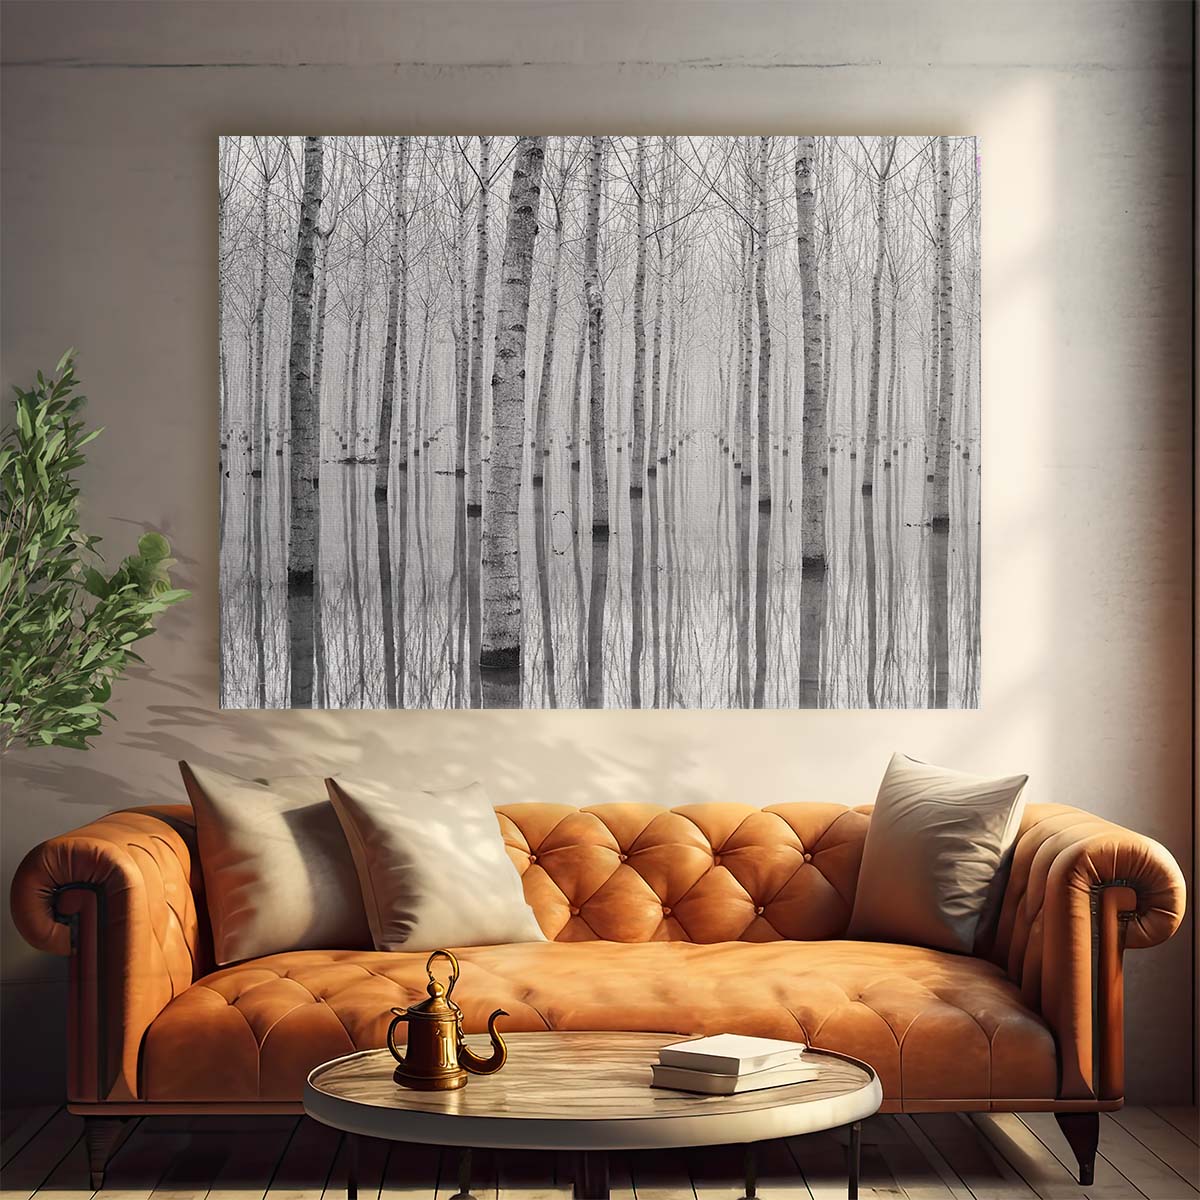 Autumn Birch Forest Reflections Monochrome Wall Art by Luxuriance Designs. Made in USA.